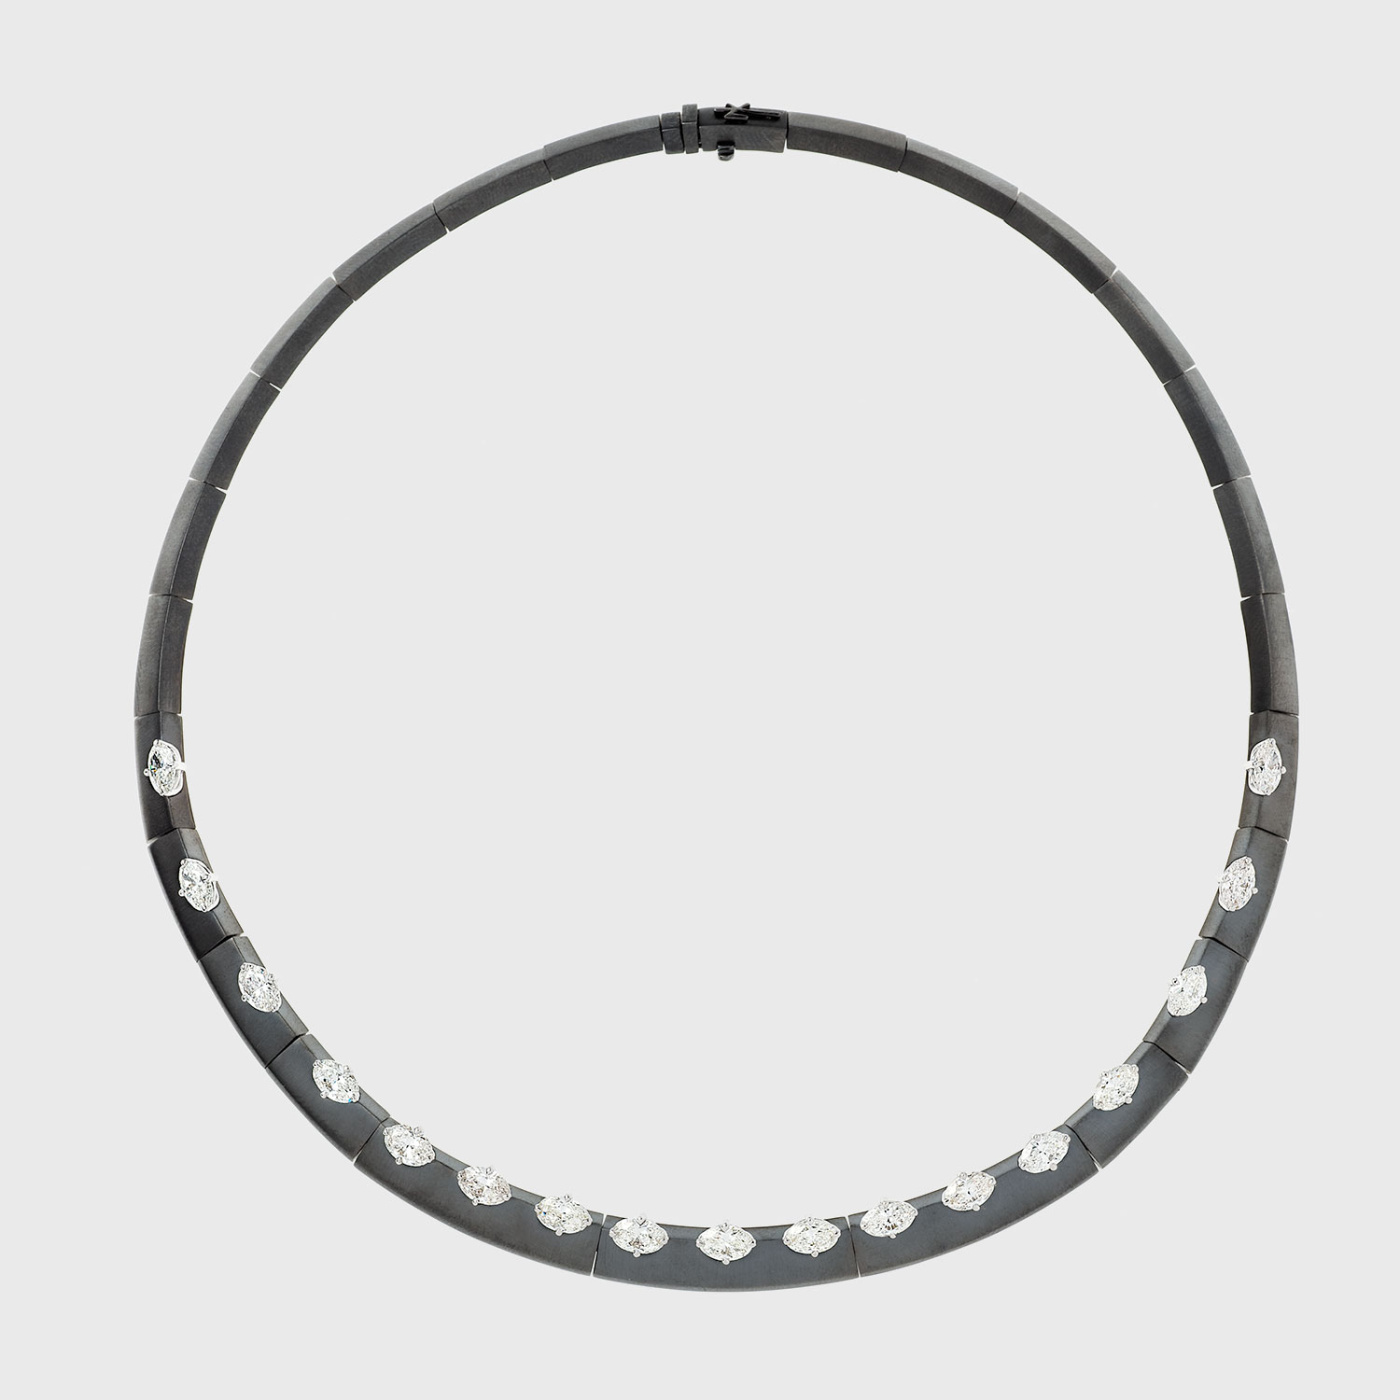 Blackened white gold necklace with oval white diamonds